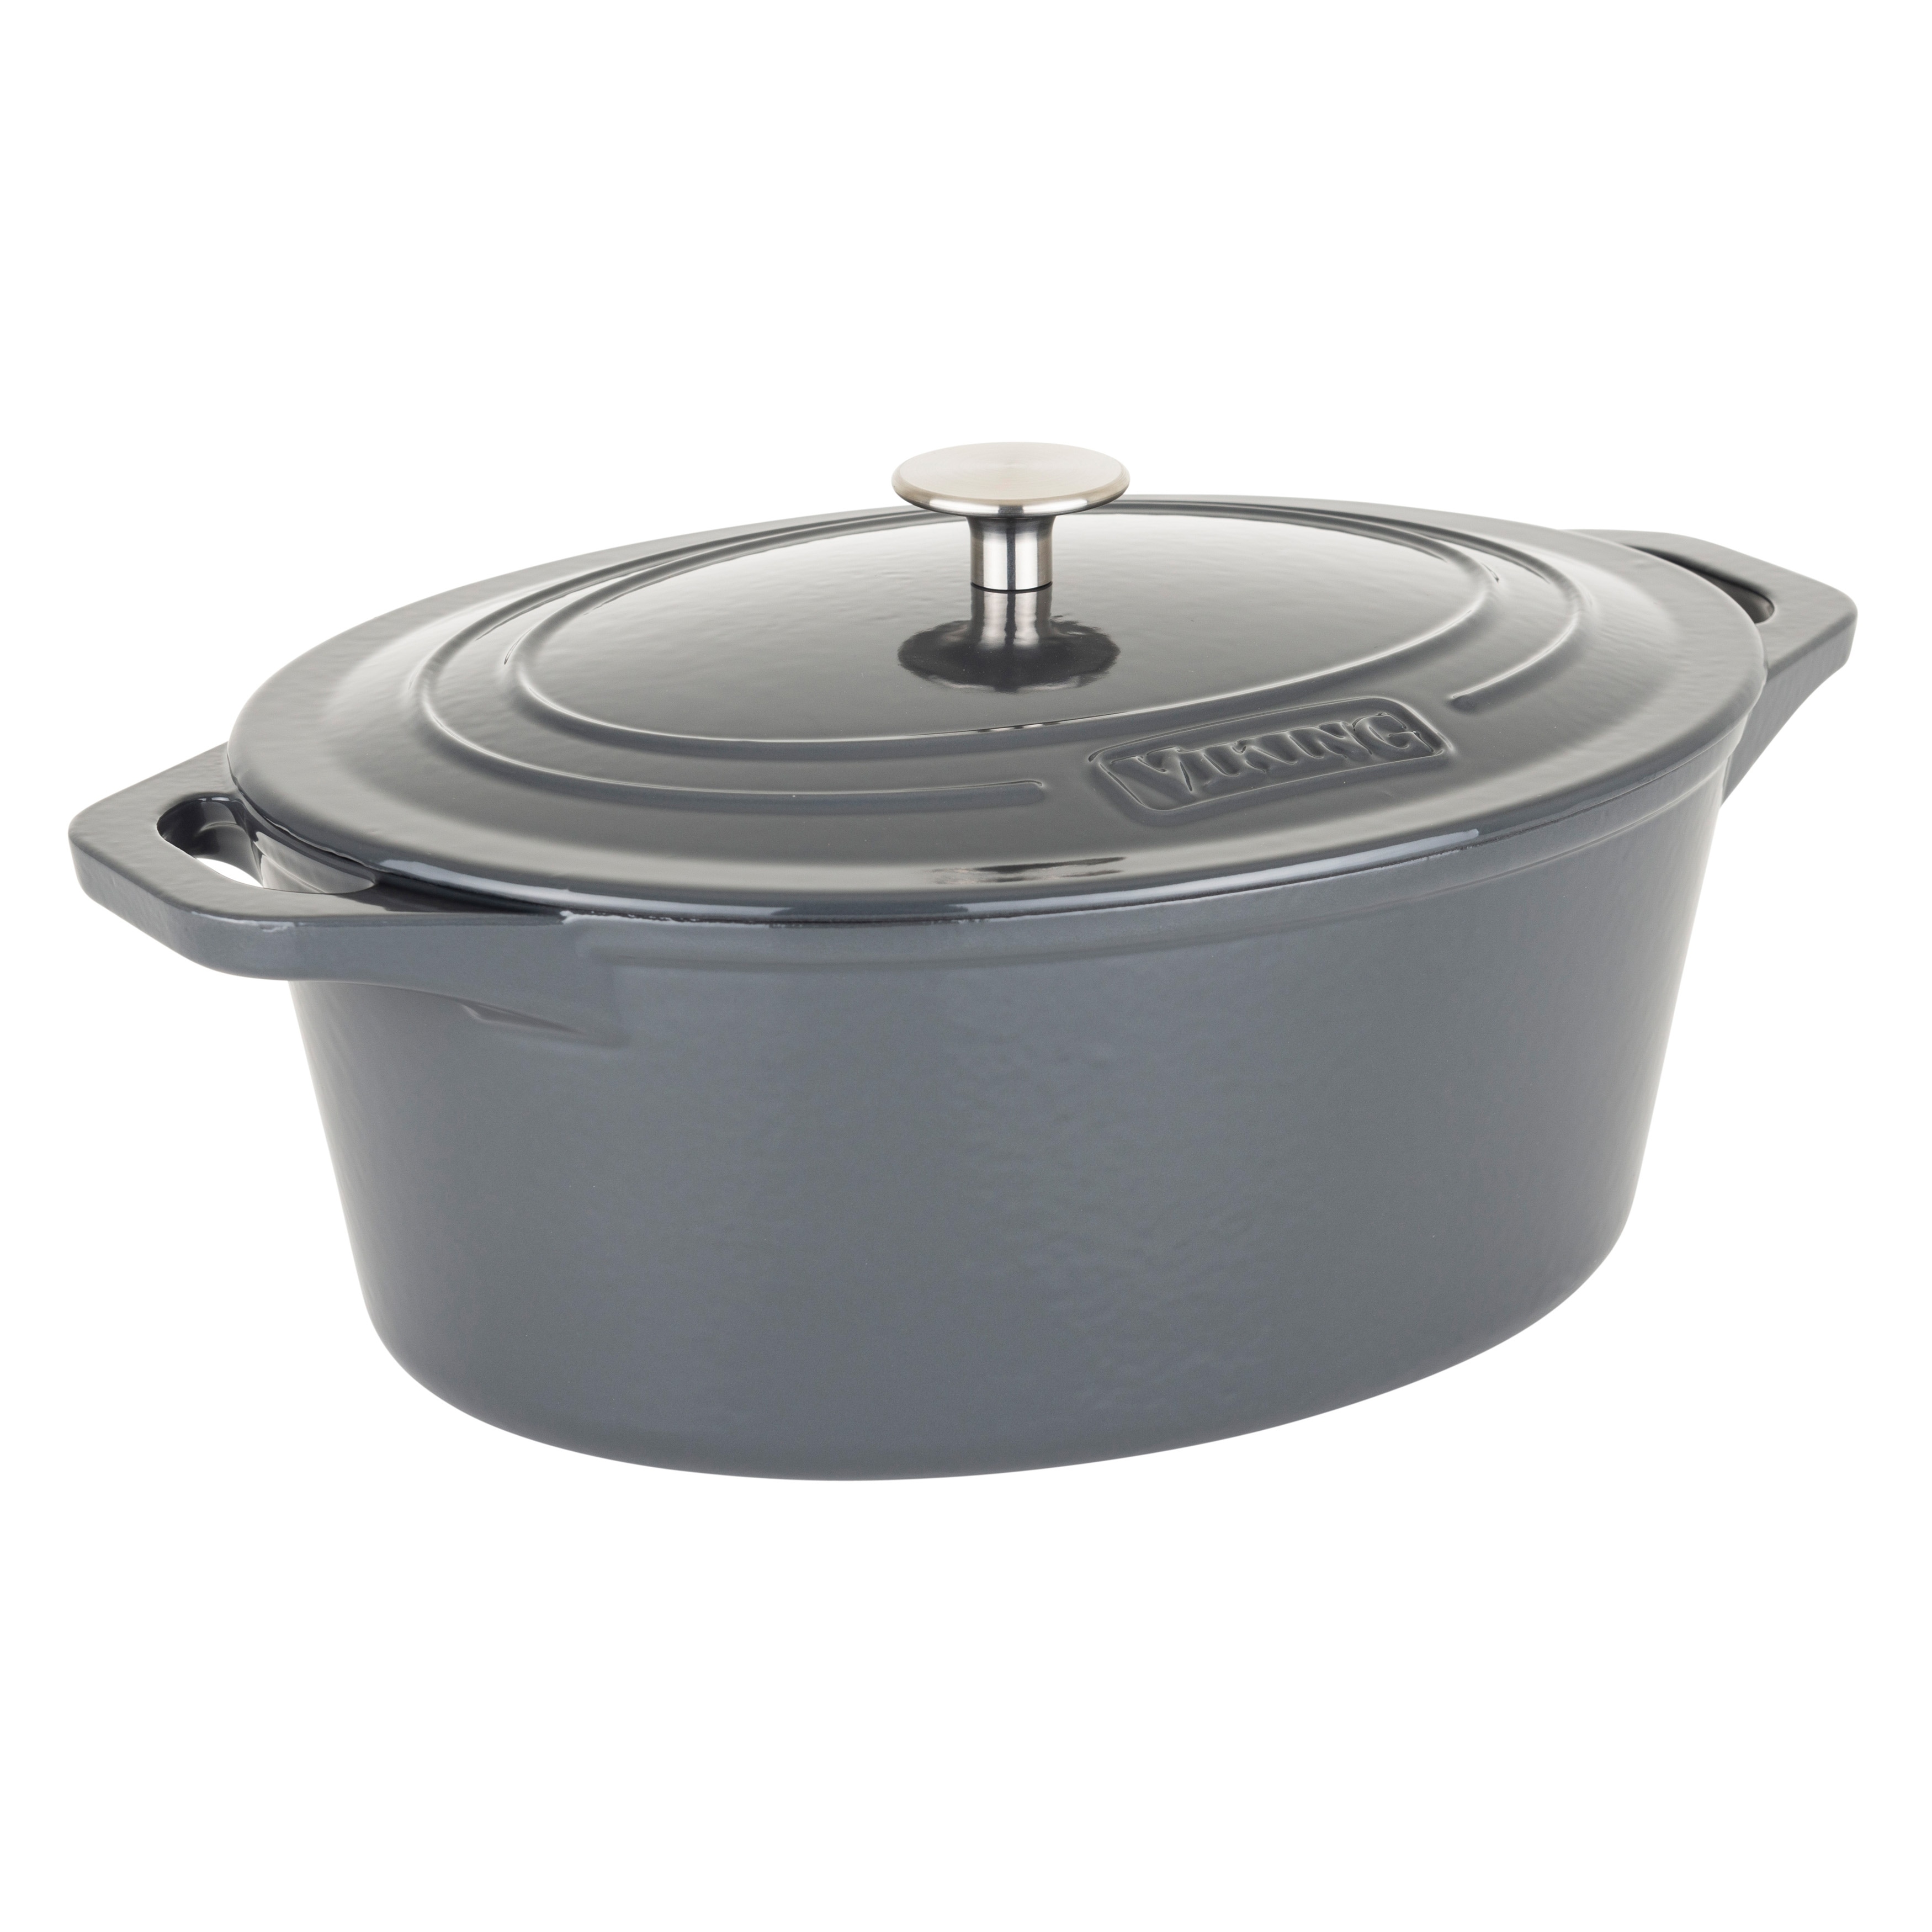 https://ak1.ostkcdn.com/images/products/is/images/direct/fe69e8965c9630f9997a1c6bfd1b7695715a05a8/Viking-Cast-Iron-7-Quart-Oval-Roaster-Gray.jpg